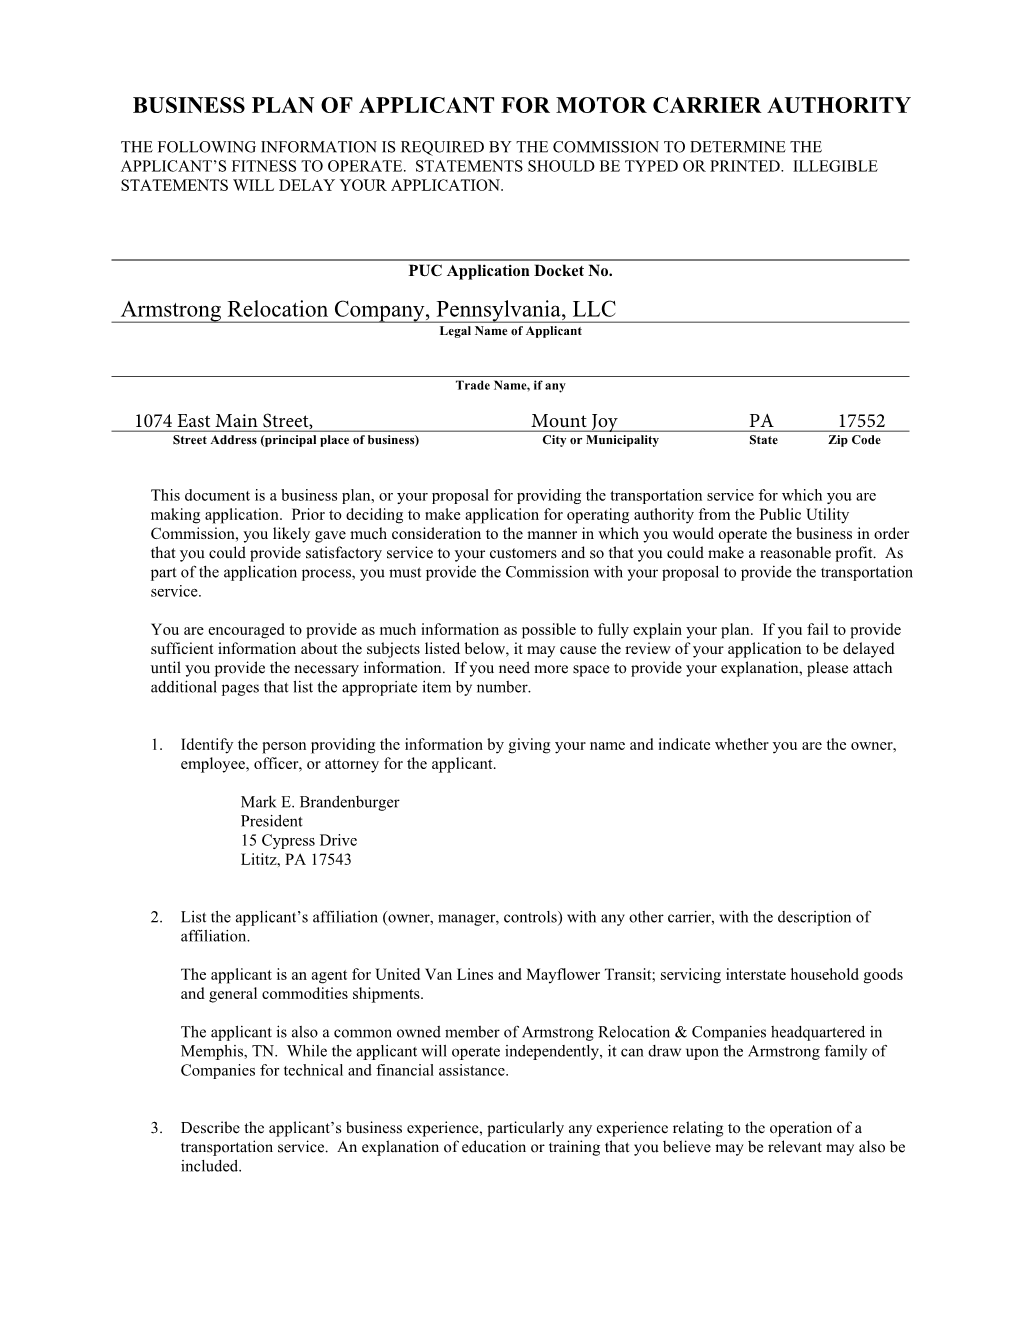 Business Plan of Applicant for Motor Carrier Authority